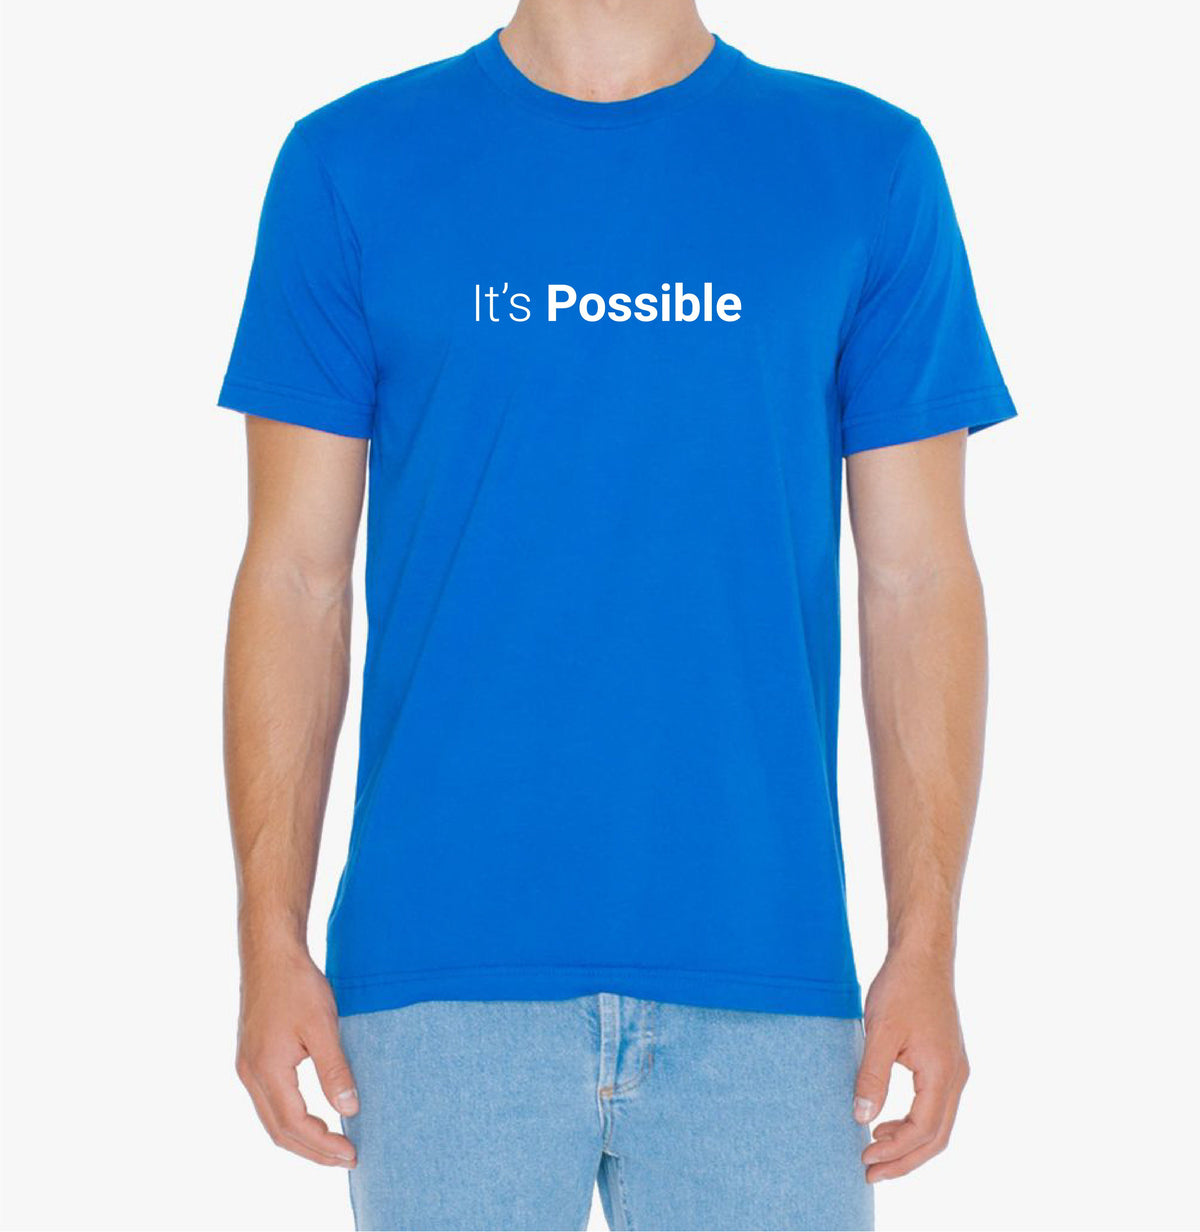 CTL "It's Possible with CTL" Tee Shirt (All shirts are size XL)